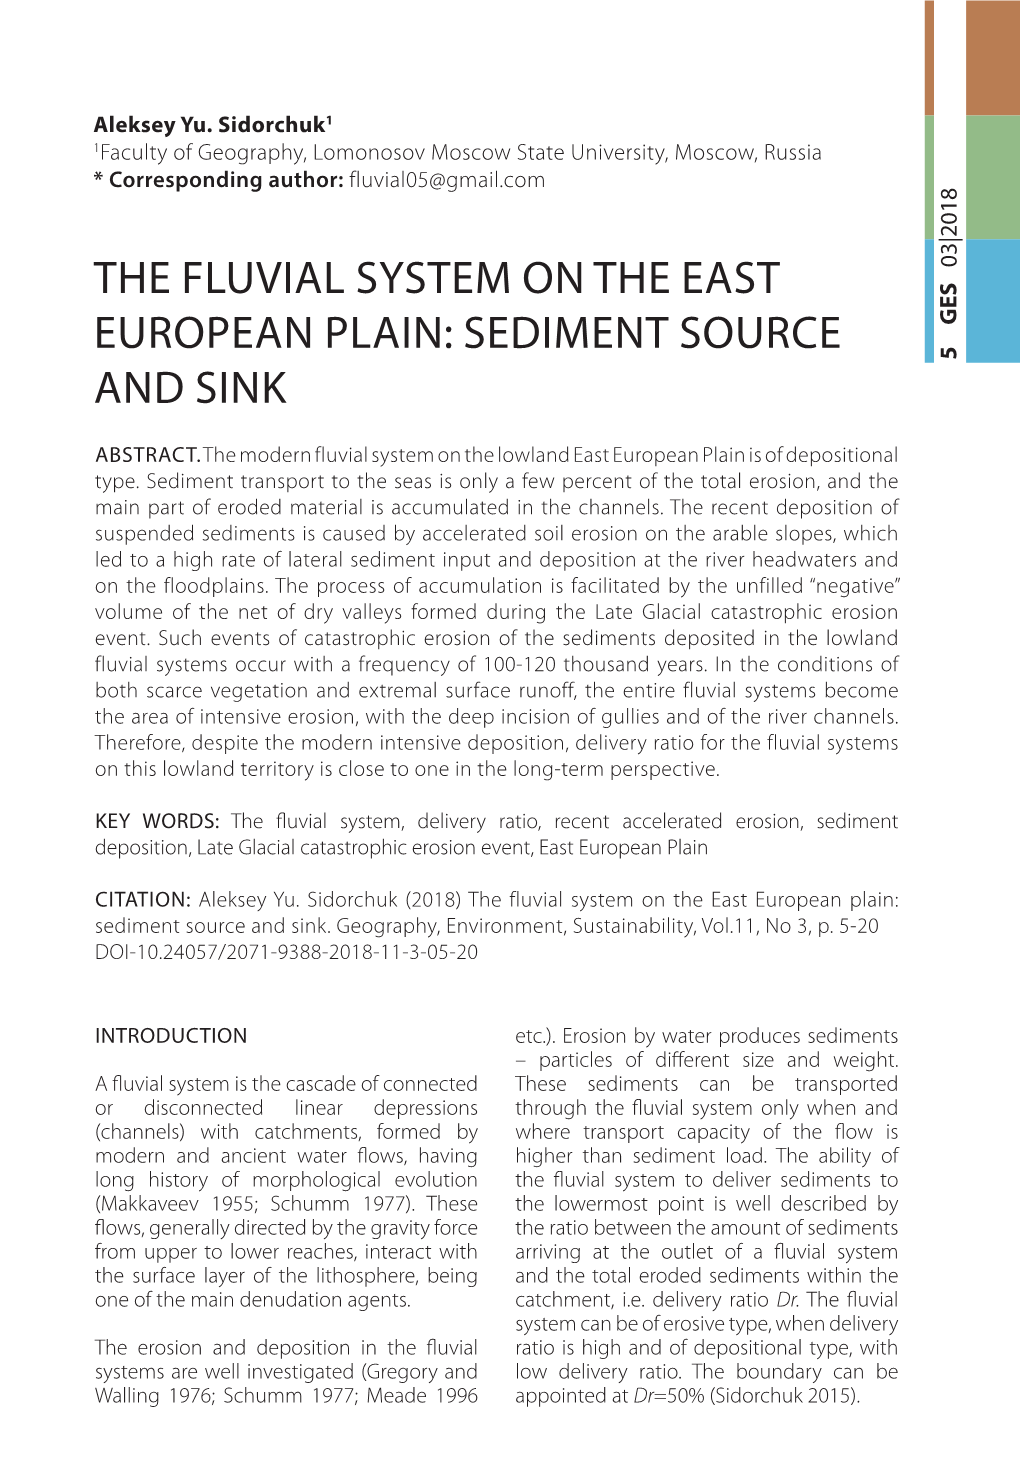 THE Fluvial SYSTEM on the EAST EUROPEAN PLAIN: SEDIMENT SOURCE and Sink